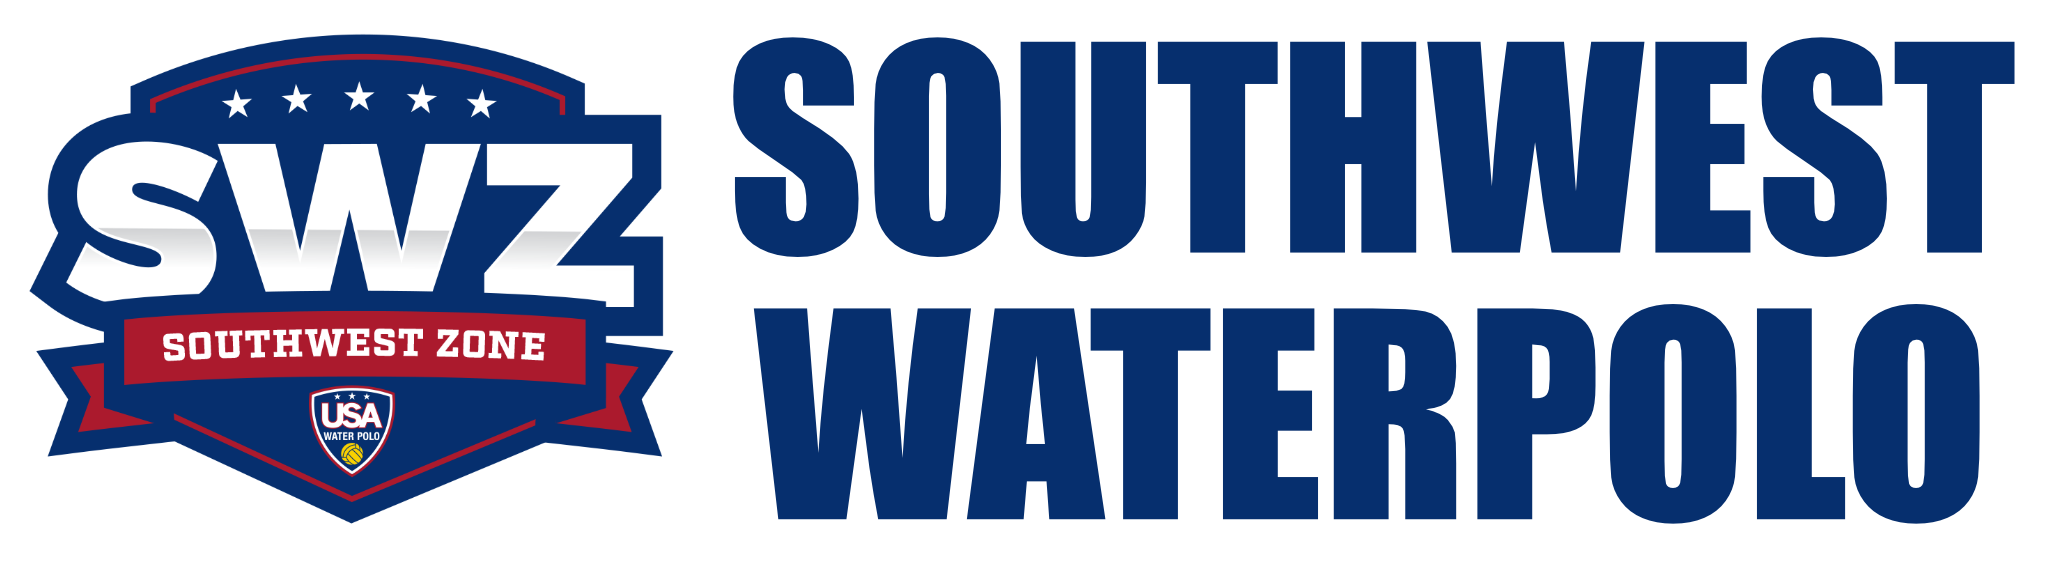 Southwest Water Polo